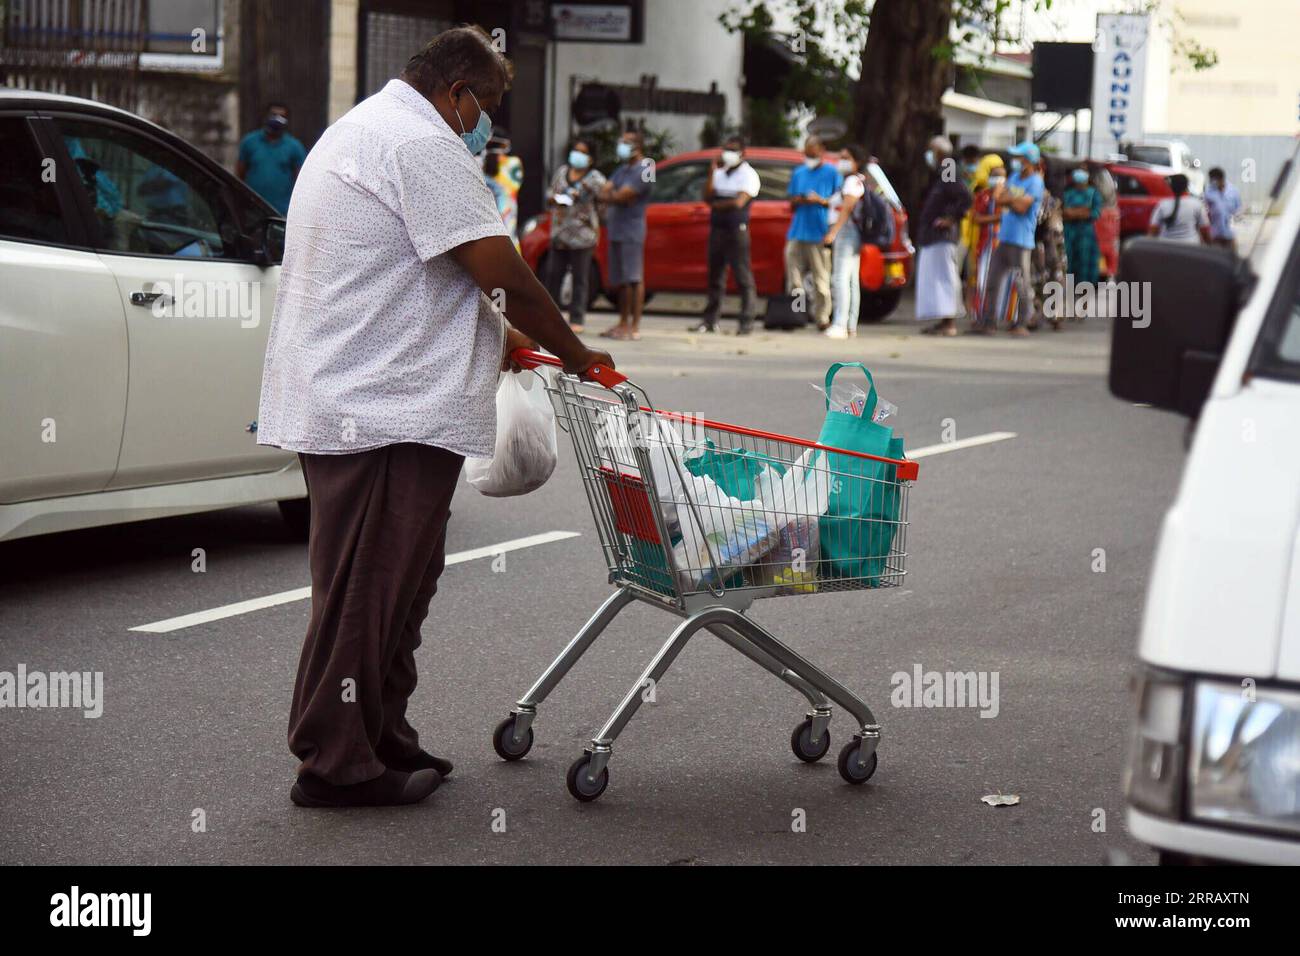 210820 -- COLOMBO, Aug. 20, 2021 -- A man pushes a cart with essential goods after Sri Lankan authority announced a 10-day nationwide quarantine curfew, in Colombo, Sri Lanka, on Aug. 20, 2021. A 10-day nationwide quarantine curfew will be imposed in Sri Lanka from Friday night in order to prevent a further spread of the COVID-19 virus, the country s Army Commander and Head of the National Operations Center for Prevention of COVID-19 Outbreak, General Shavendra Silva said on Friday. Photo by /Xinhua SRI LANKA-COLOMBO-COVID-19-QUARANTINE CURFEW-PREPARATION GayanxSameera PUBLICATIONxNOTxINxCHN Stock Photo